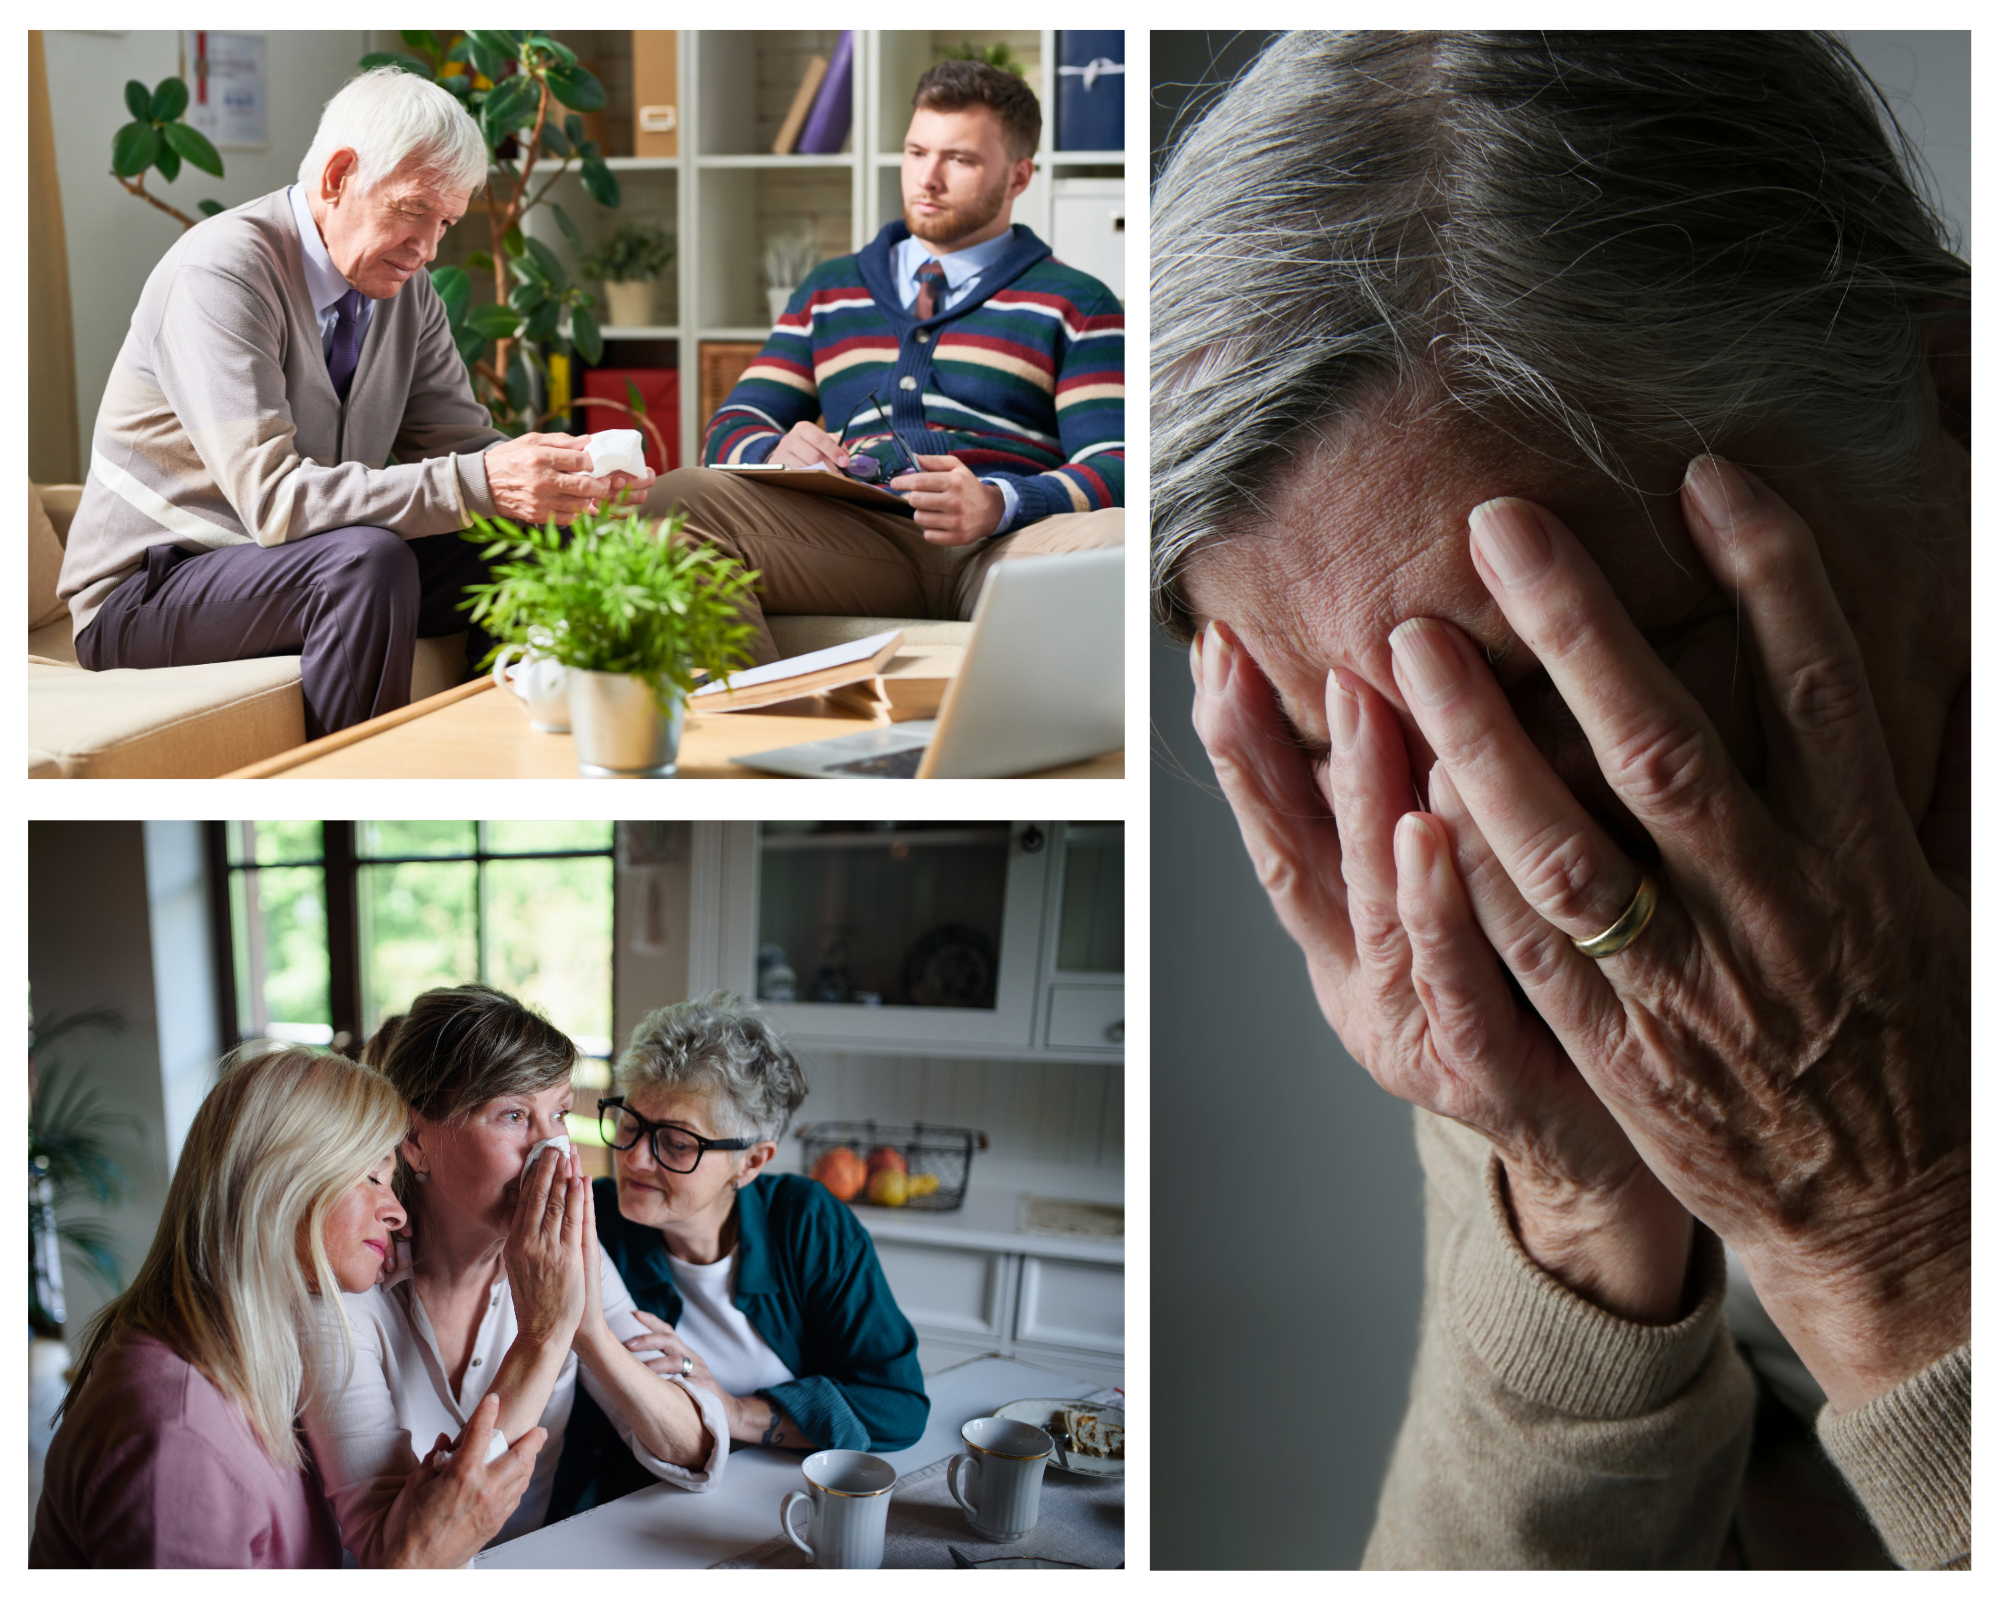 it's important to discuss mental health with seniors